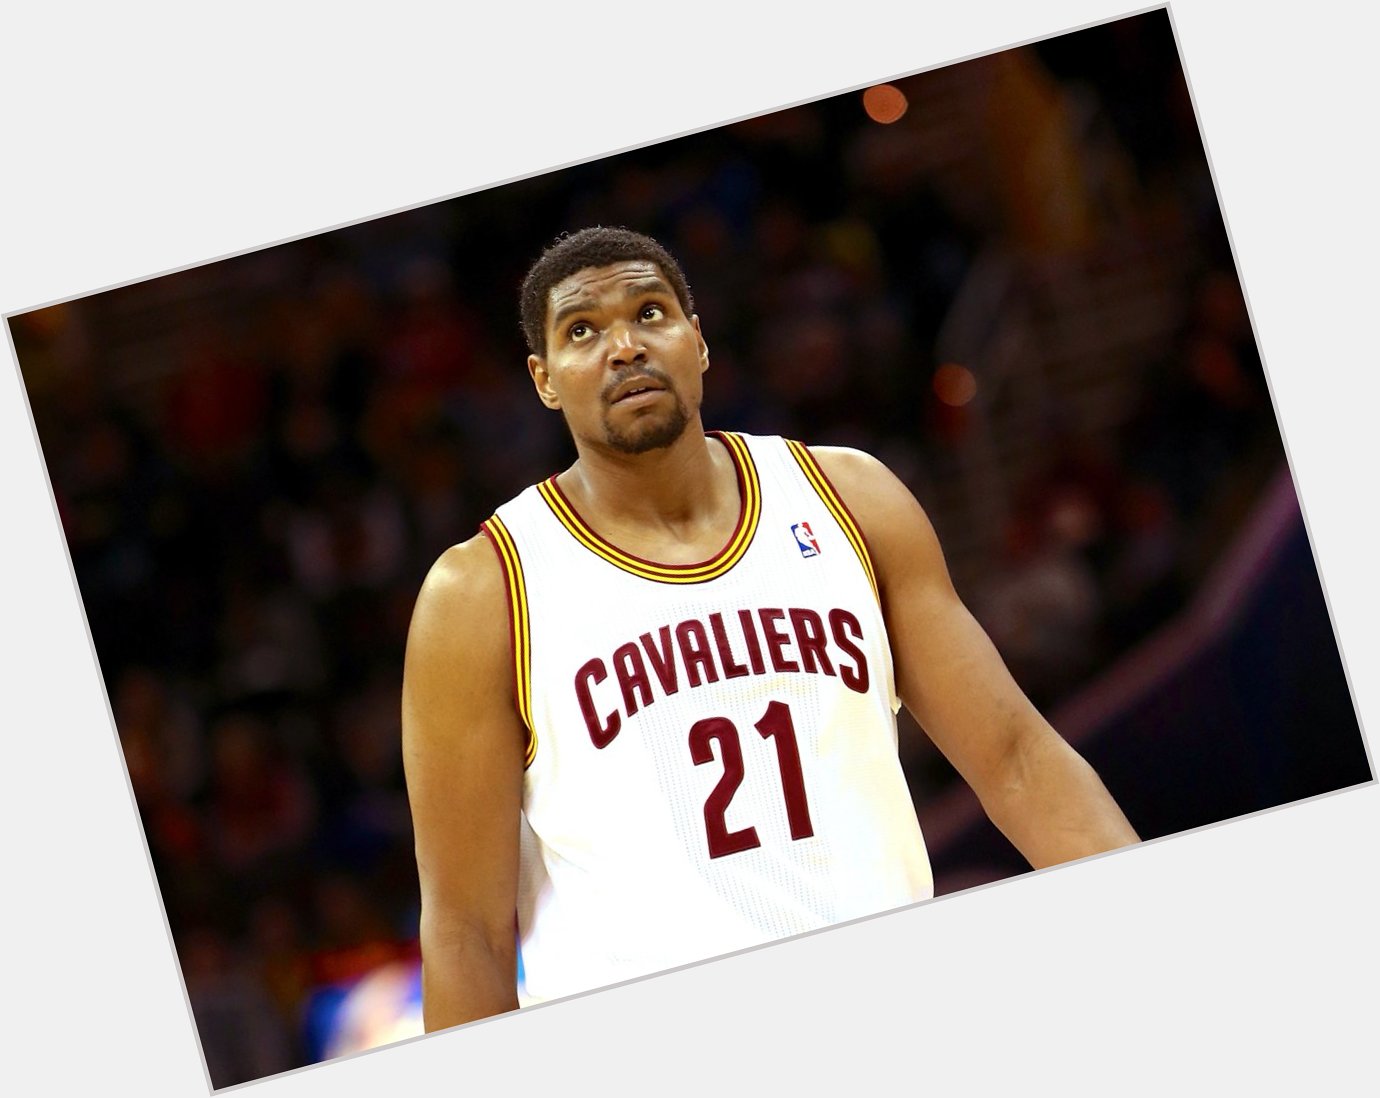 Happy birthday & thanks for nothing Andrew Bynum! Practice matters, fam. 